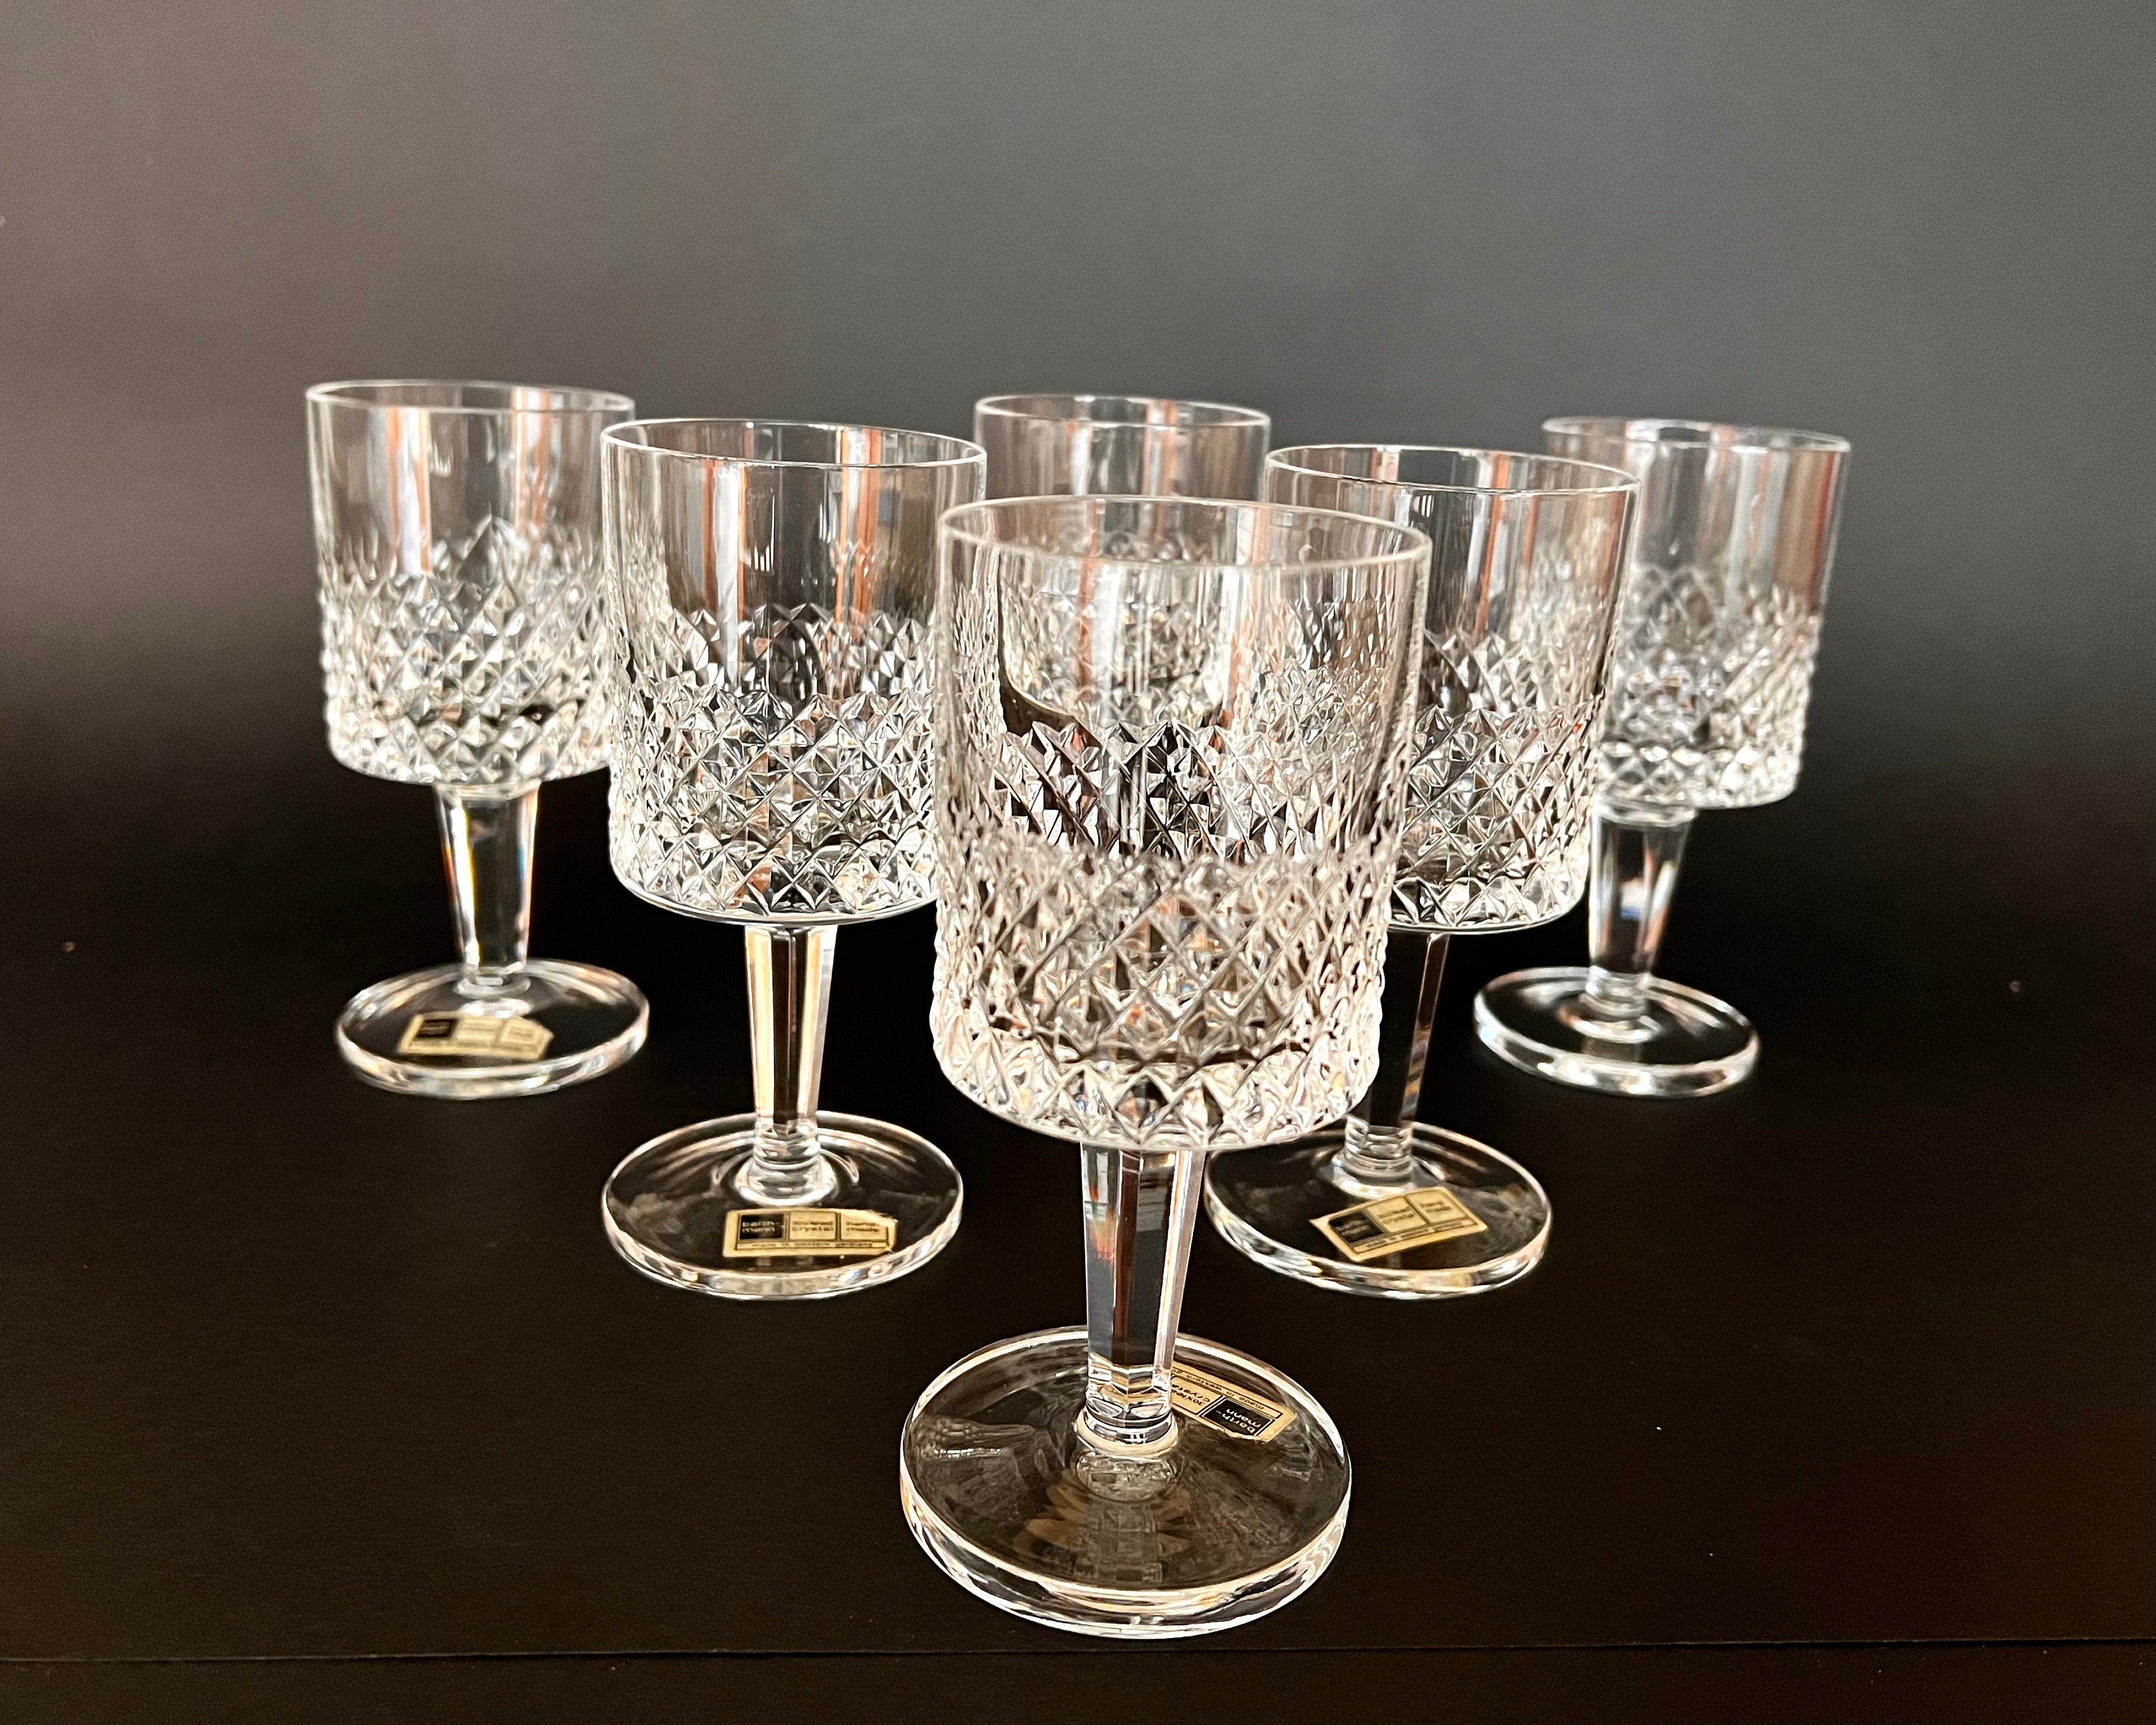 Diamond Point wine glasses in crystal glass, set of two.